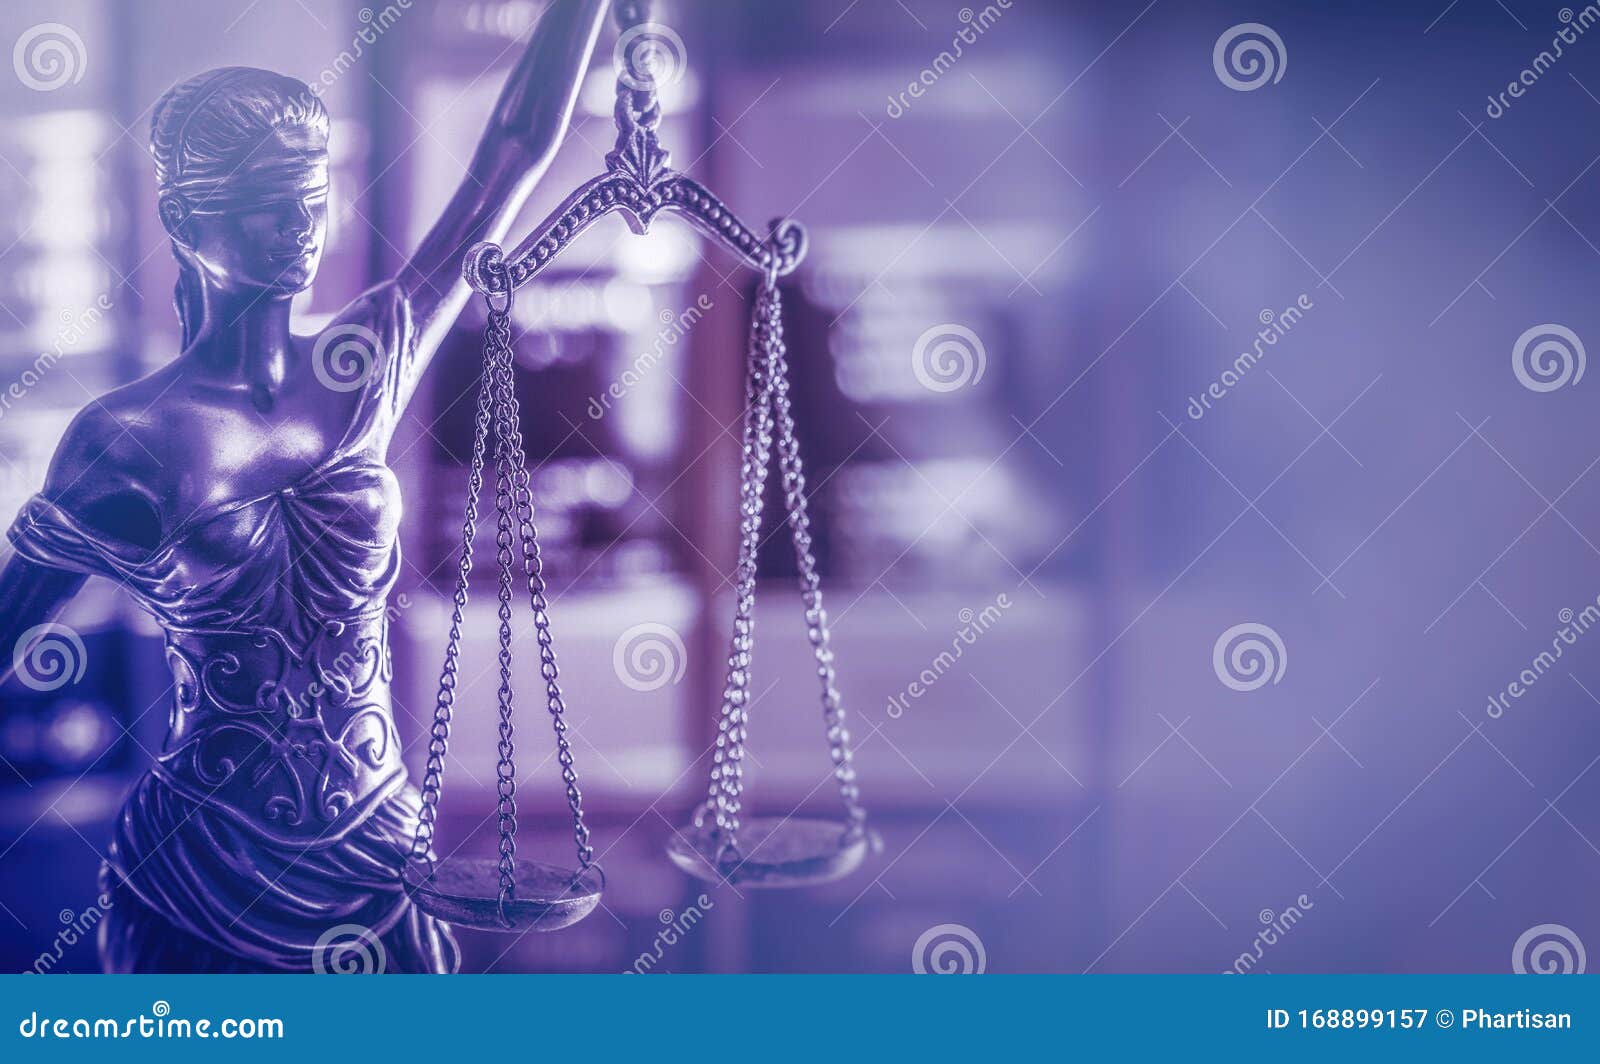 scales of justice  legal law books concept imagery